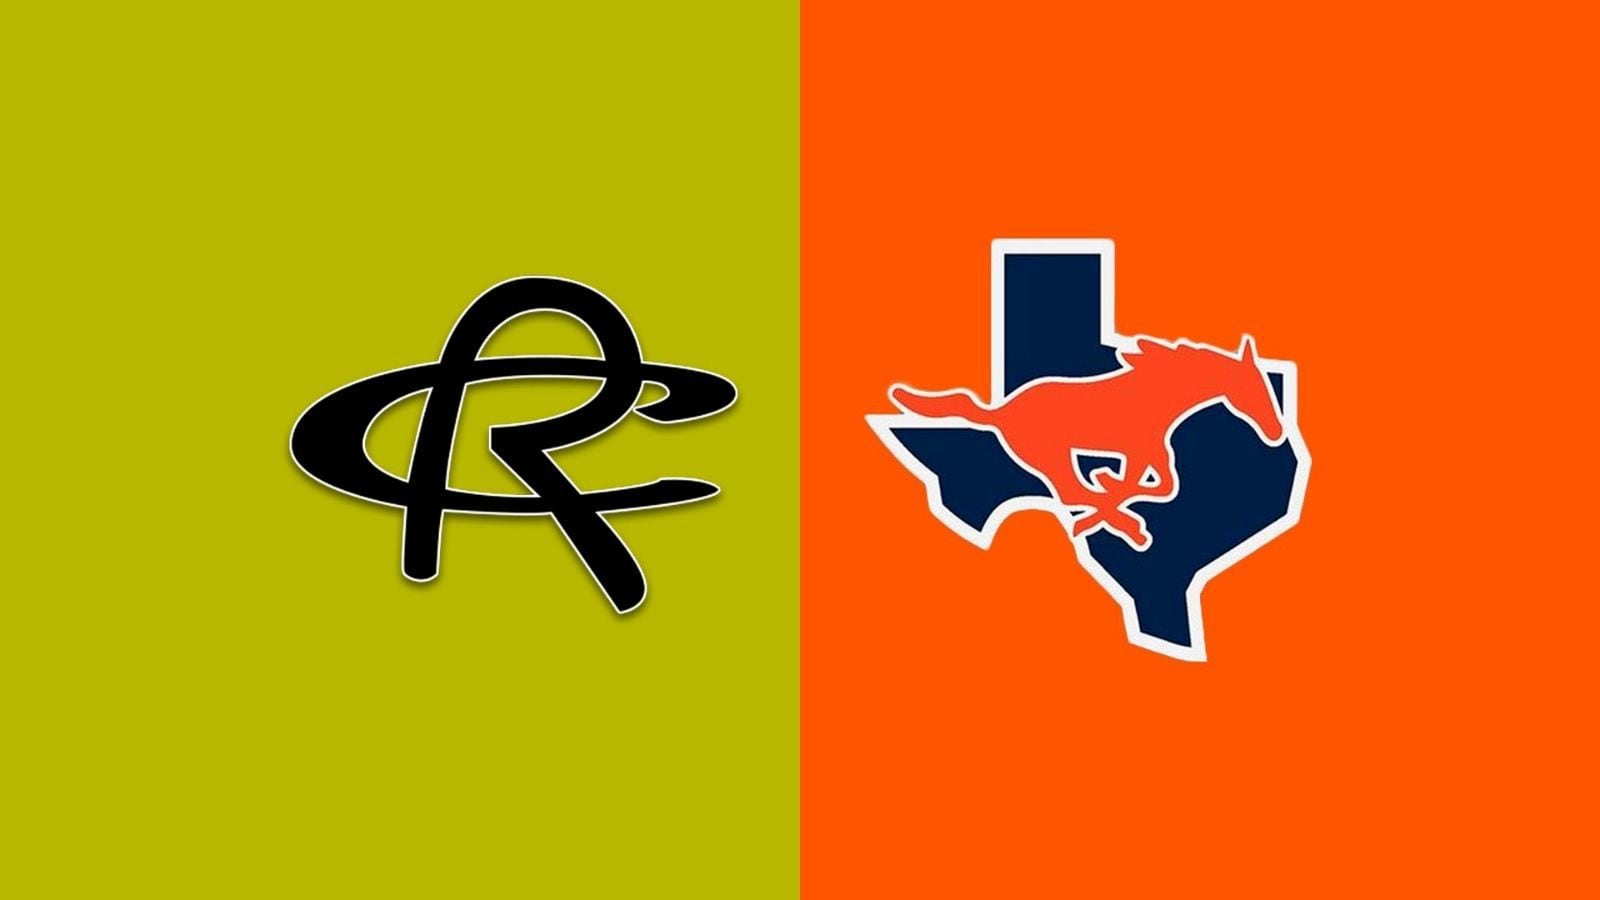 Royse City and Sachse school logos.